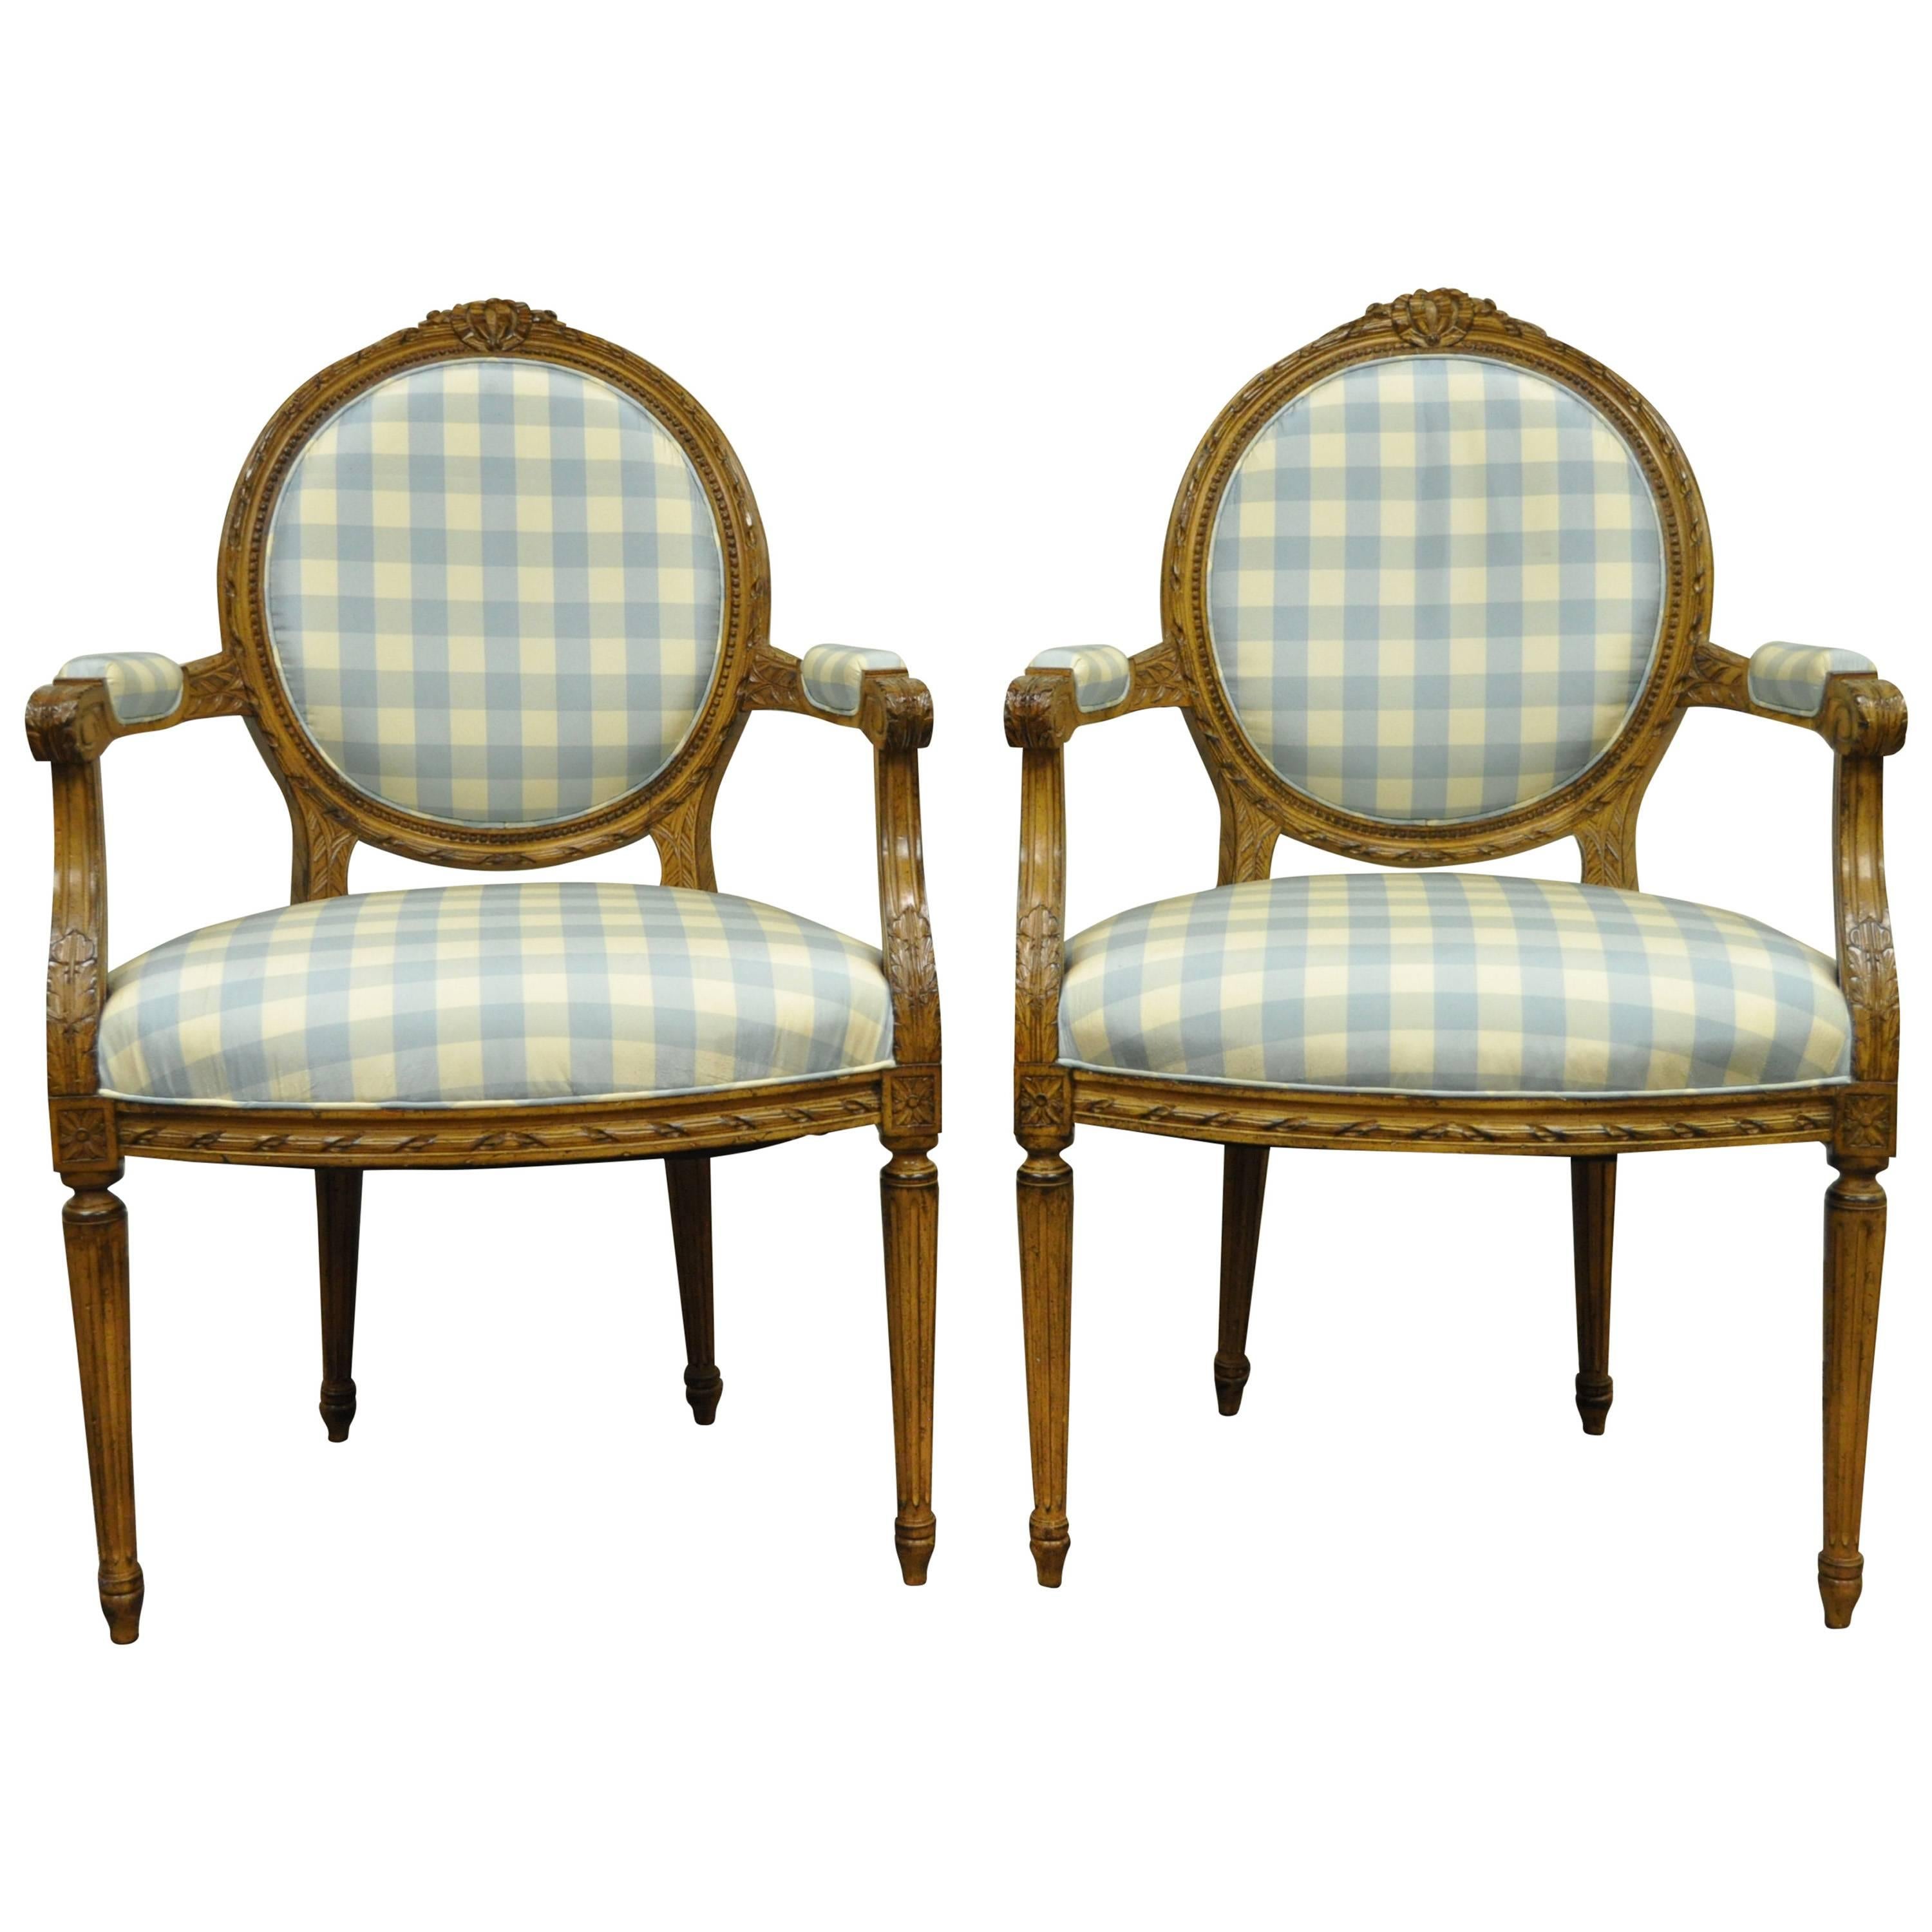 Elegant Pair of French Louis XVI Style Finely Carved Armchairs or Fauteuils